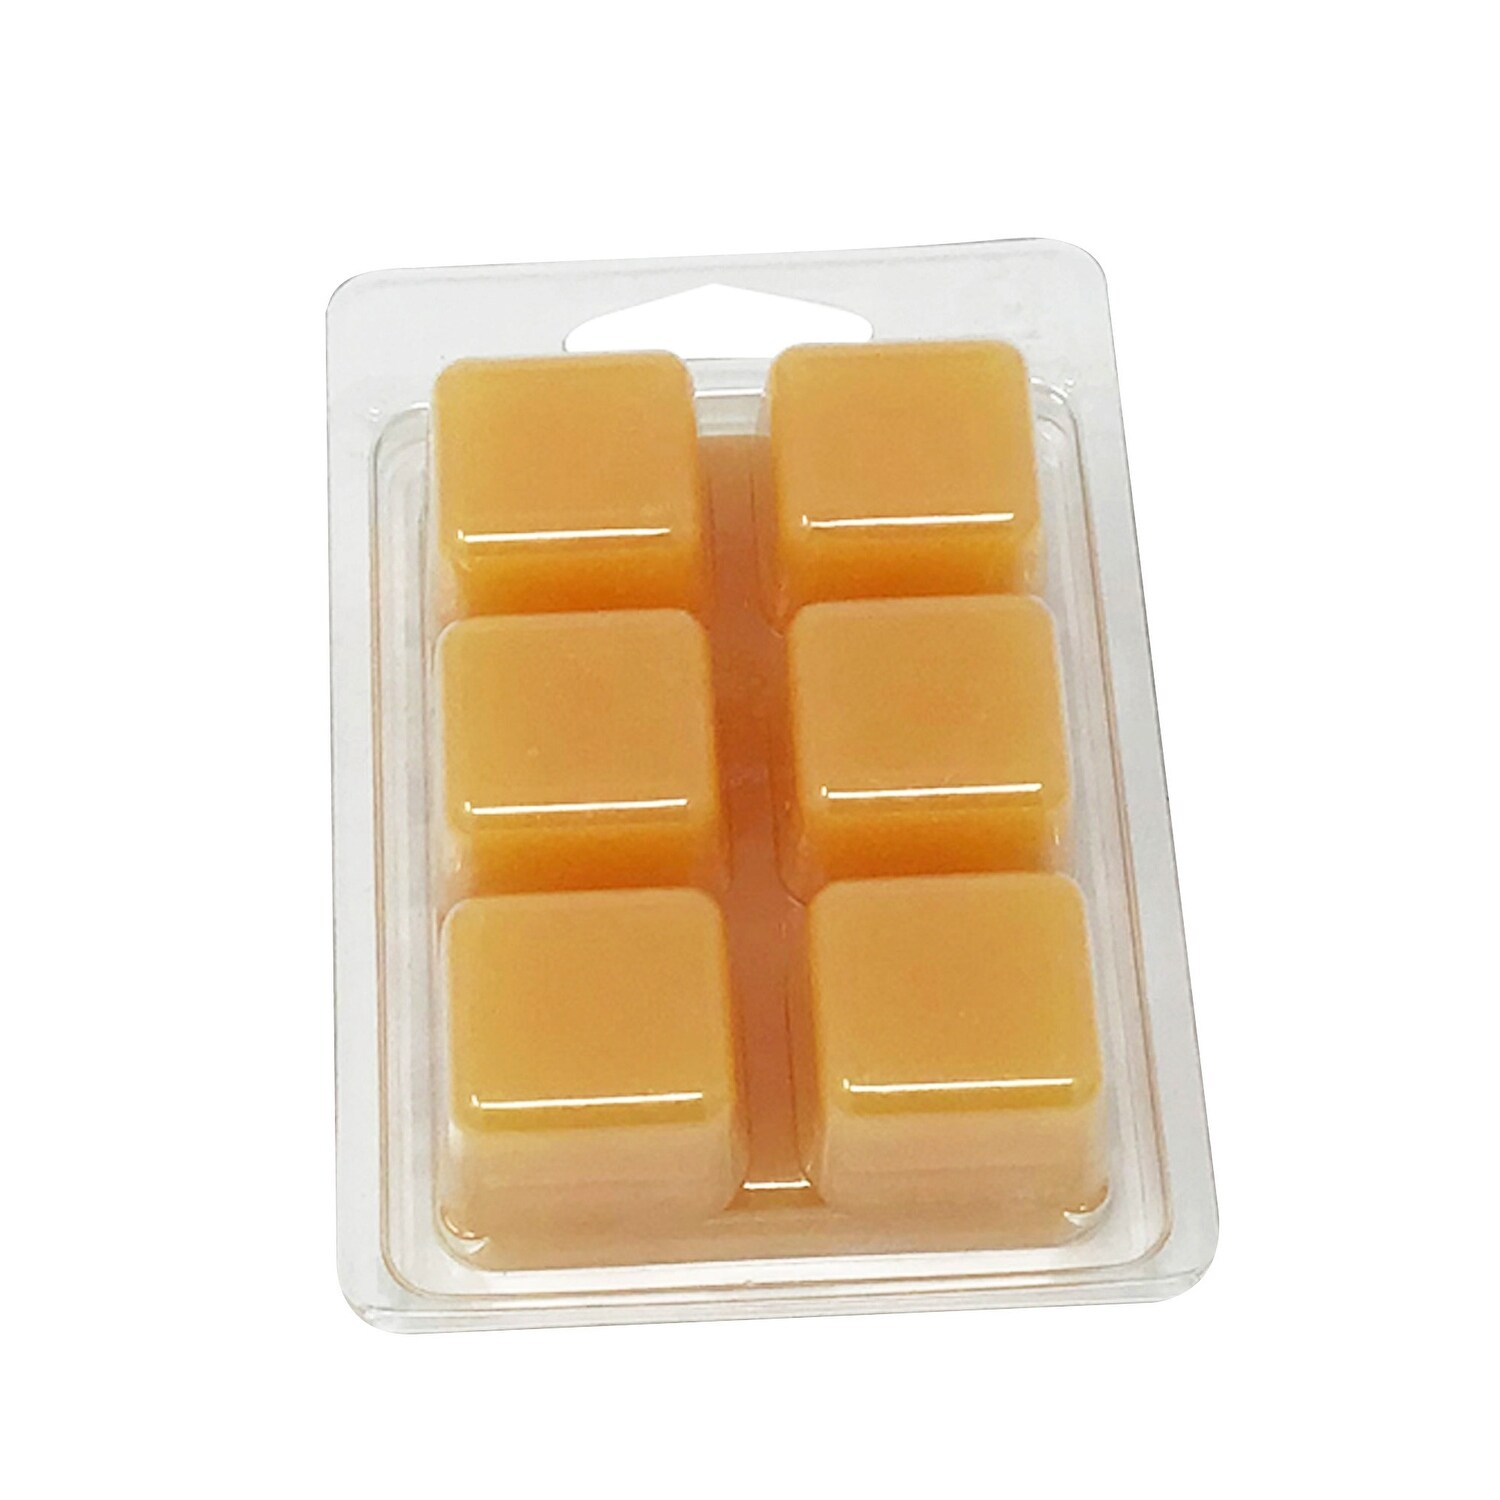 Marshmallow Crispies Scented Wax Melts, ScentSationals, 2.5 oz (1-Pack)